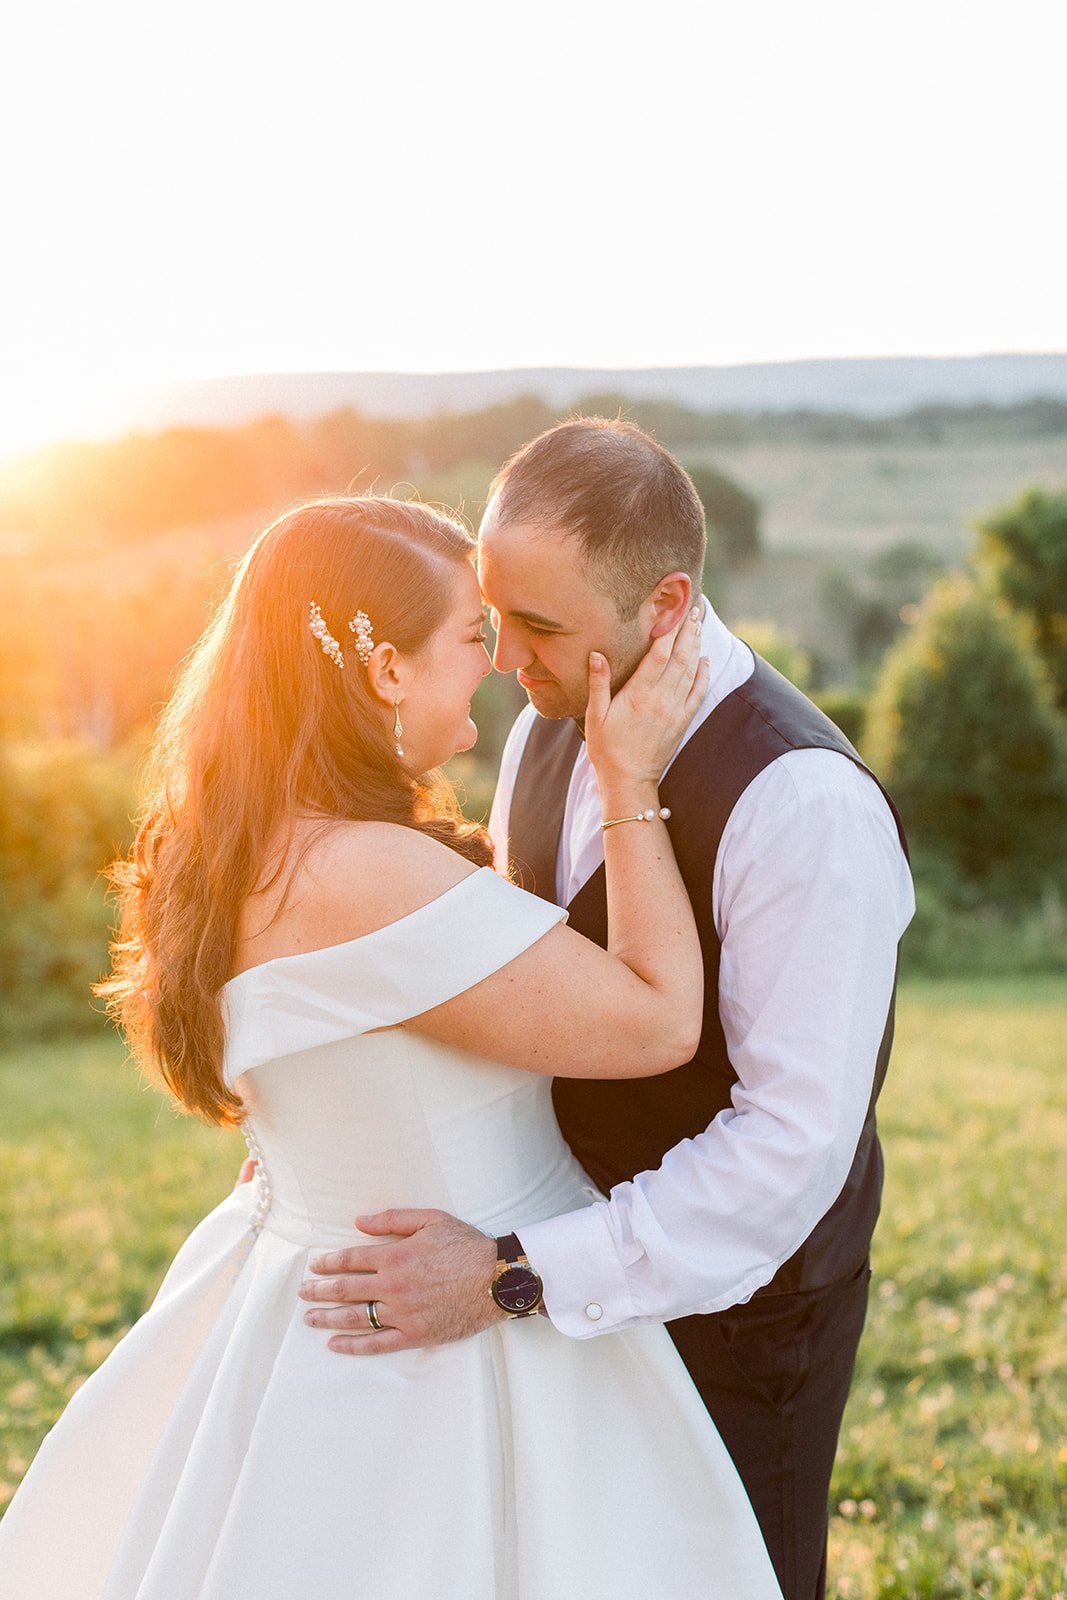 Monger/Hikmat Wedding Submission Gallery